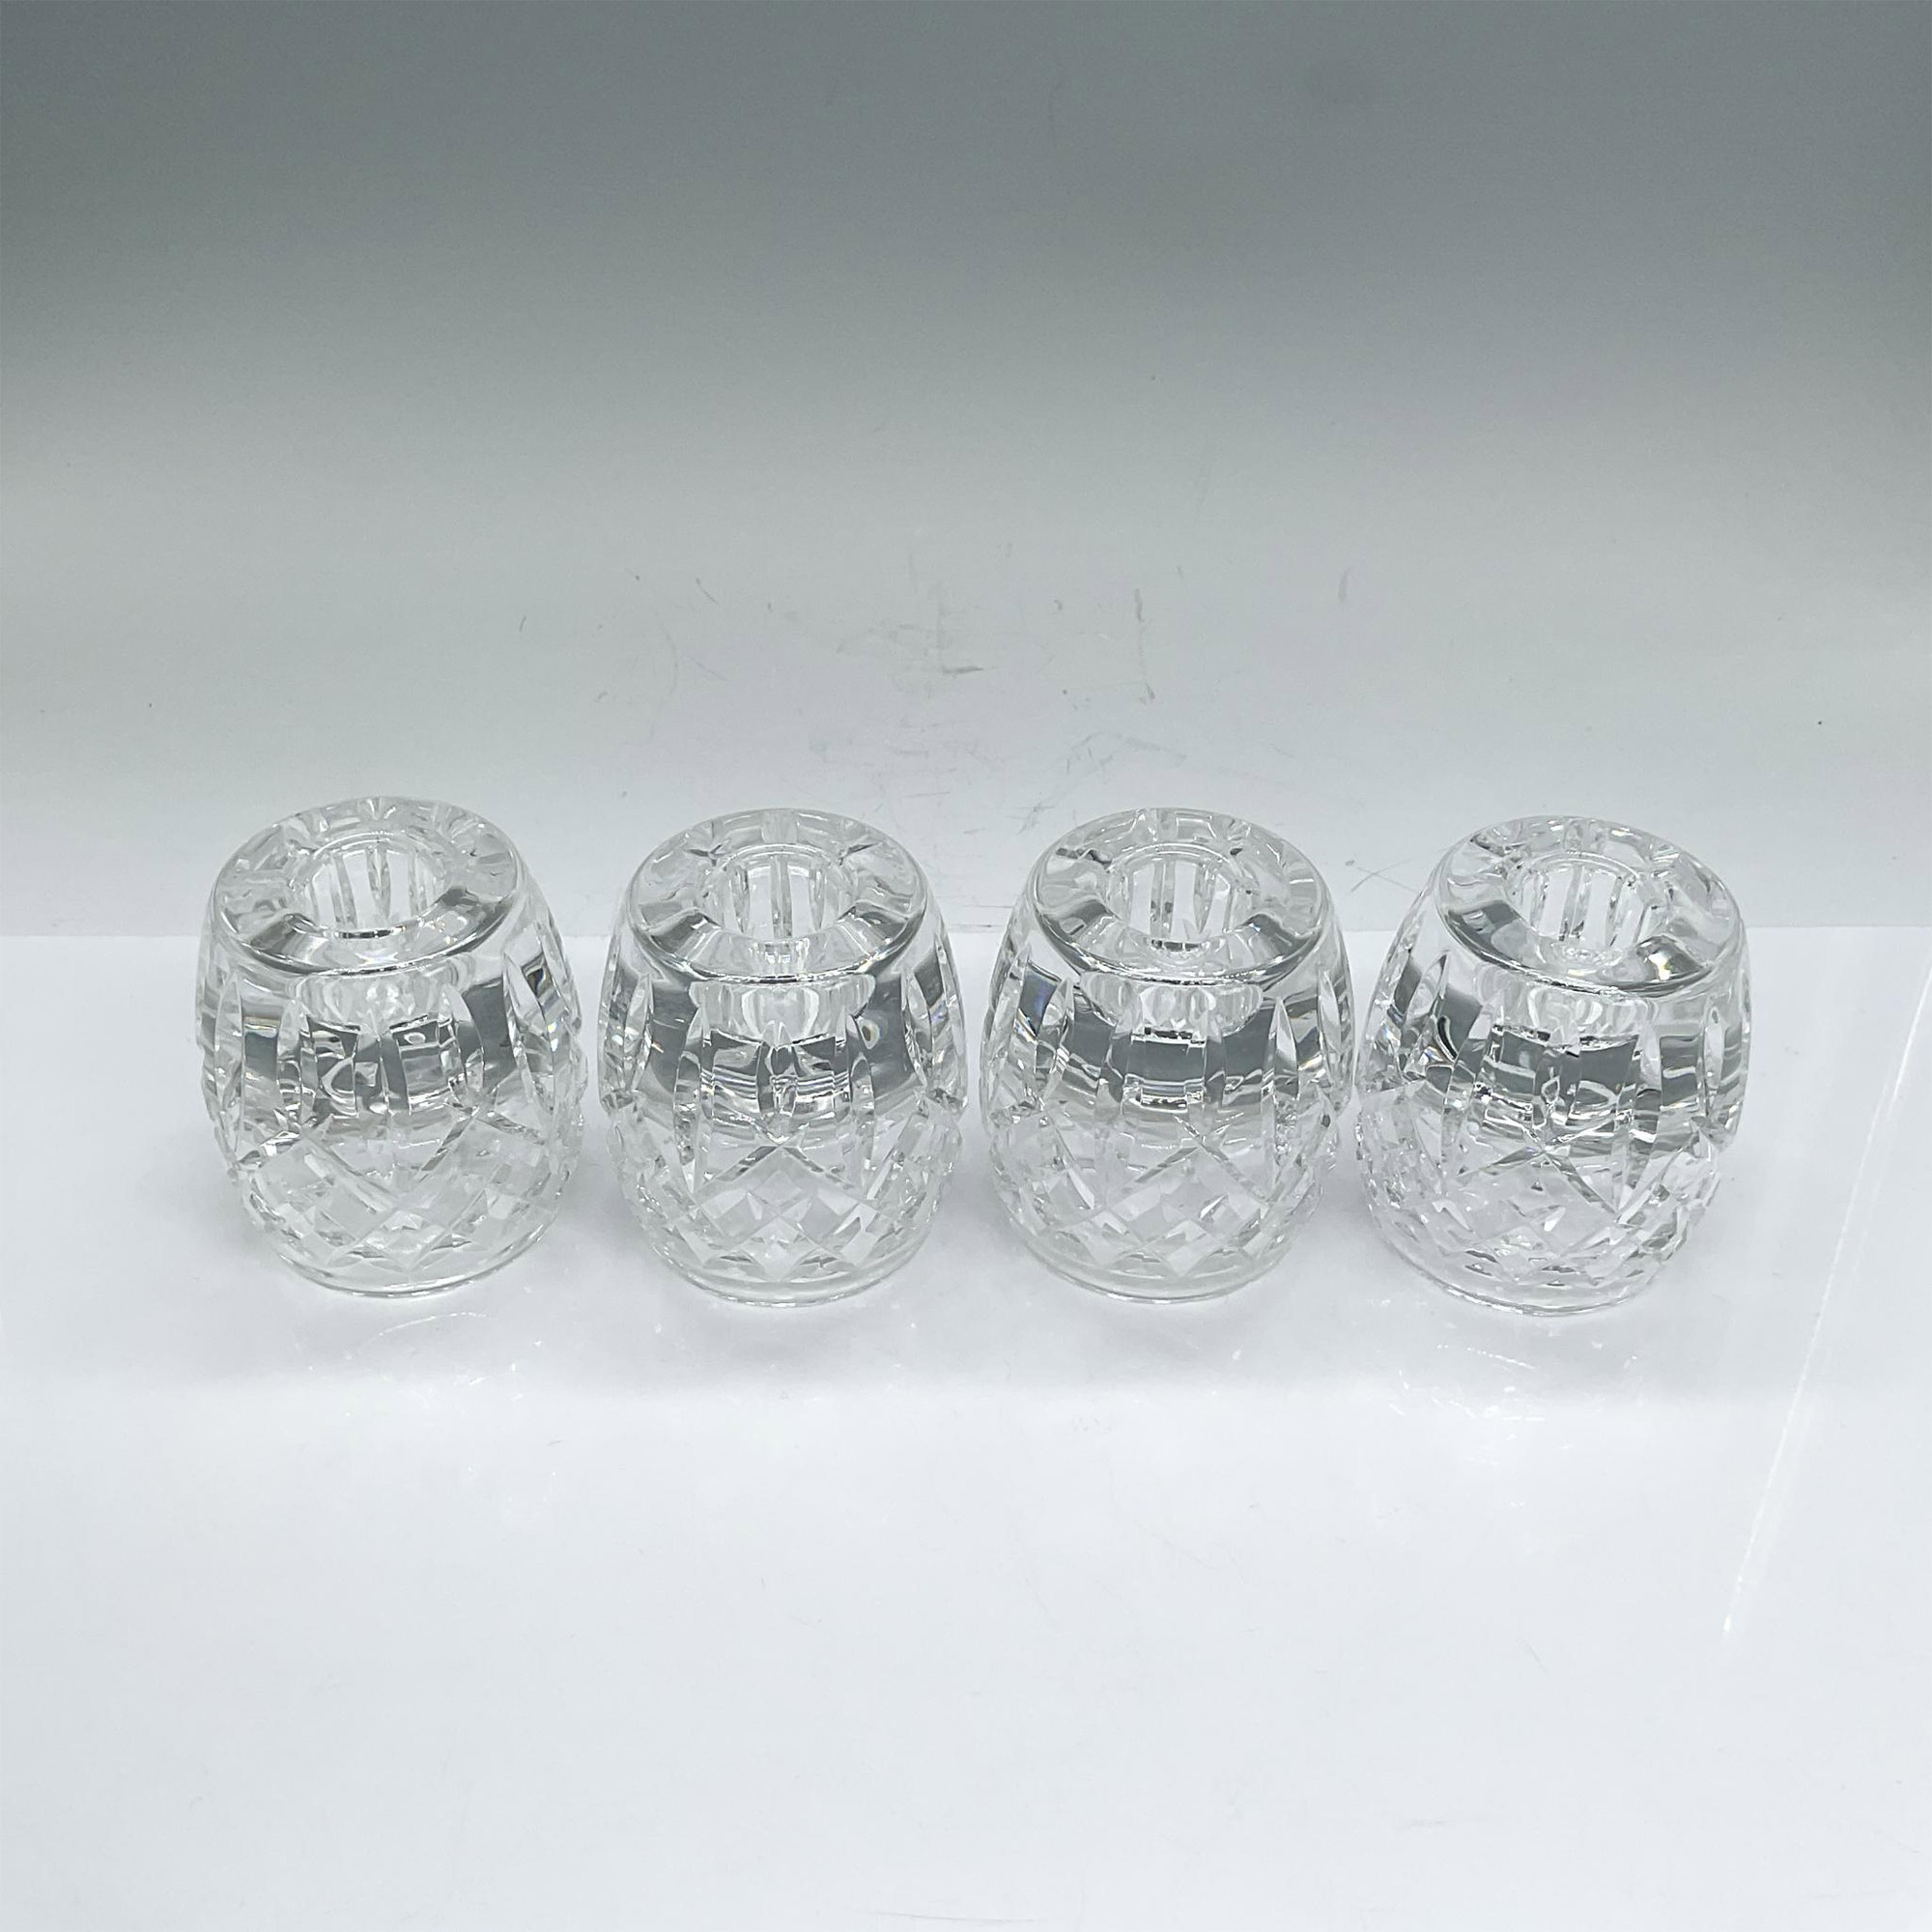 4pc Waterford Crystal Candlesticks, Lismore - Image 2 of 3